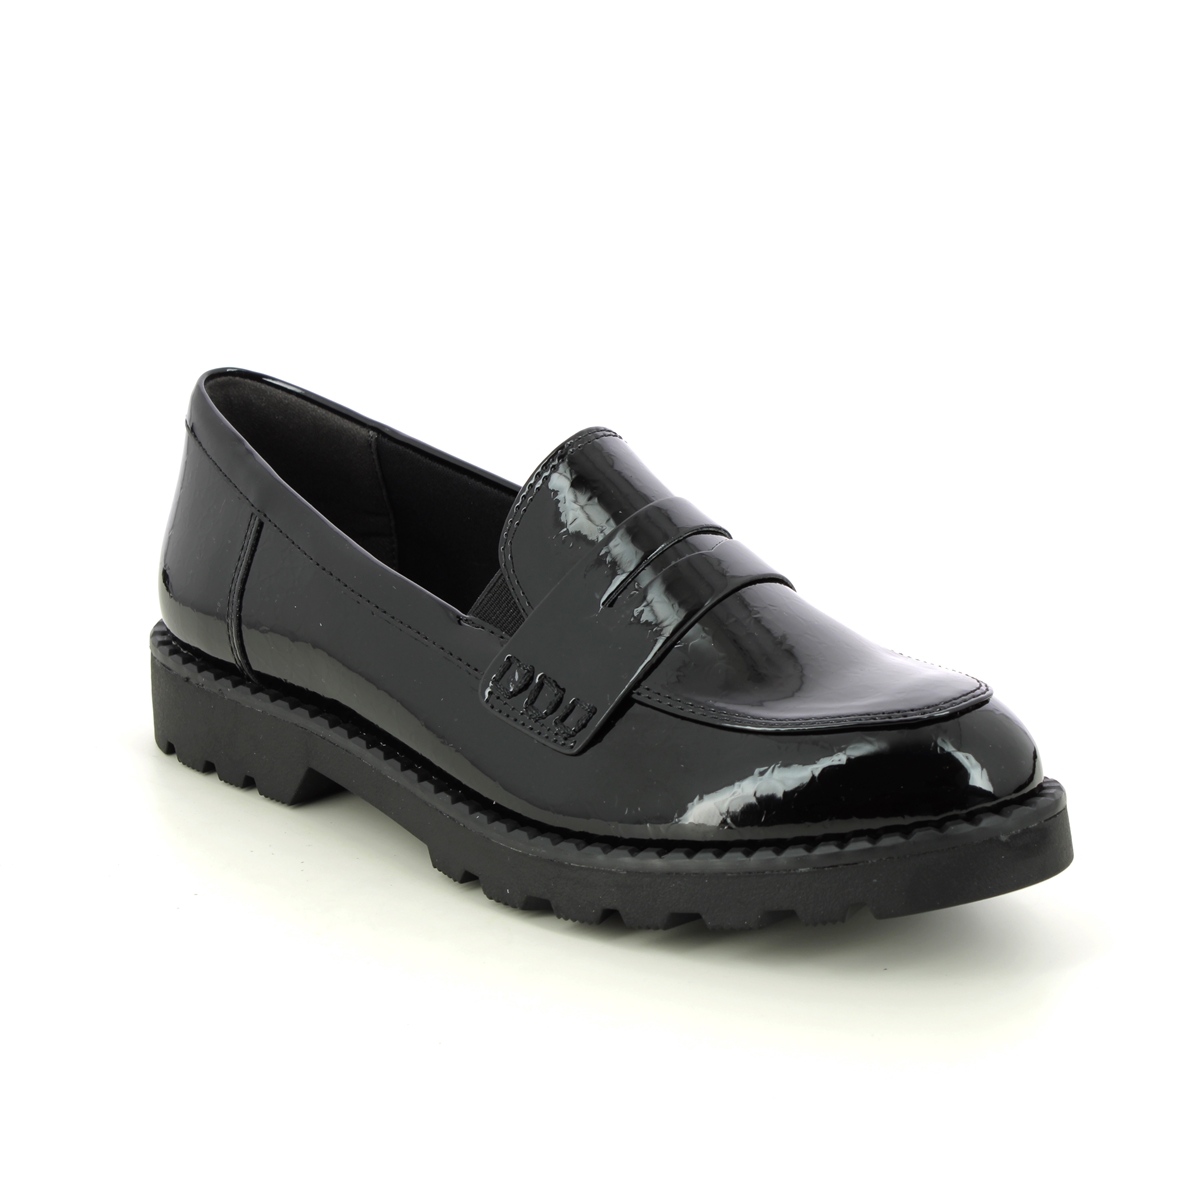 Tamaris Crissy 25 Black Patent Womens Loafers 24312-29-063 In Size 36 In Plain Black Patent